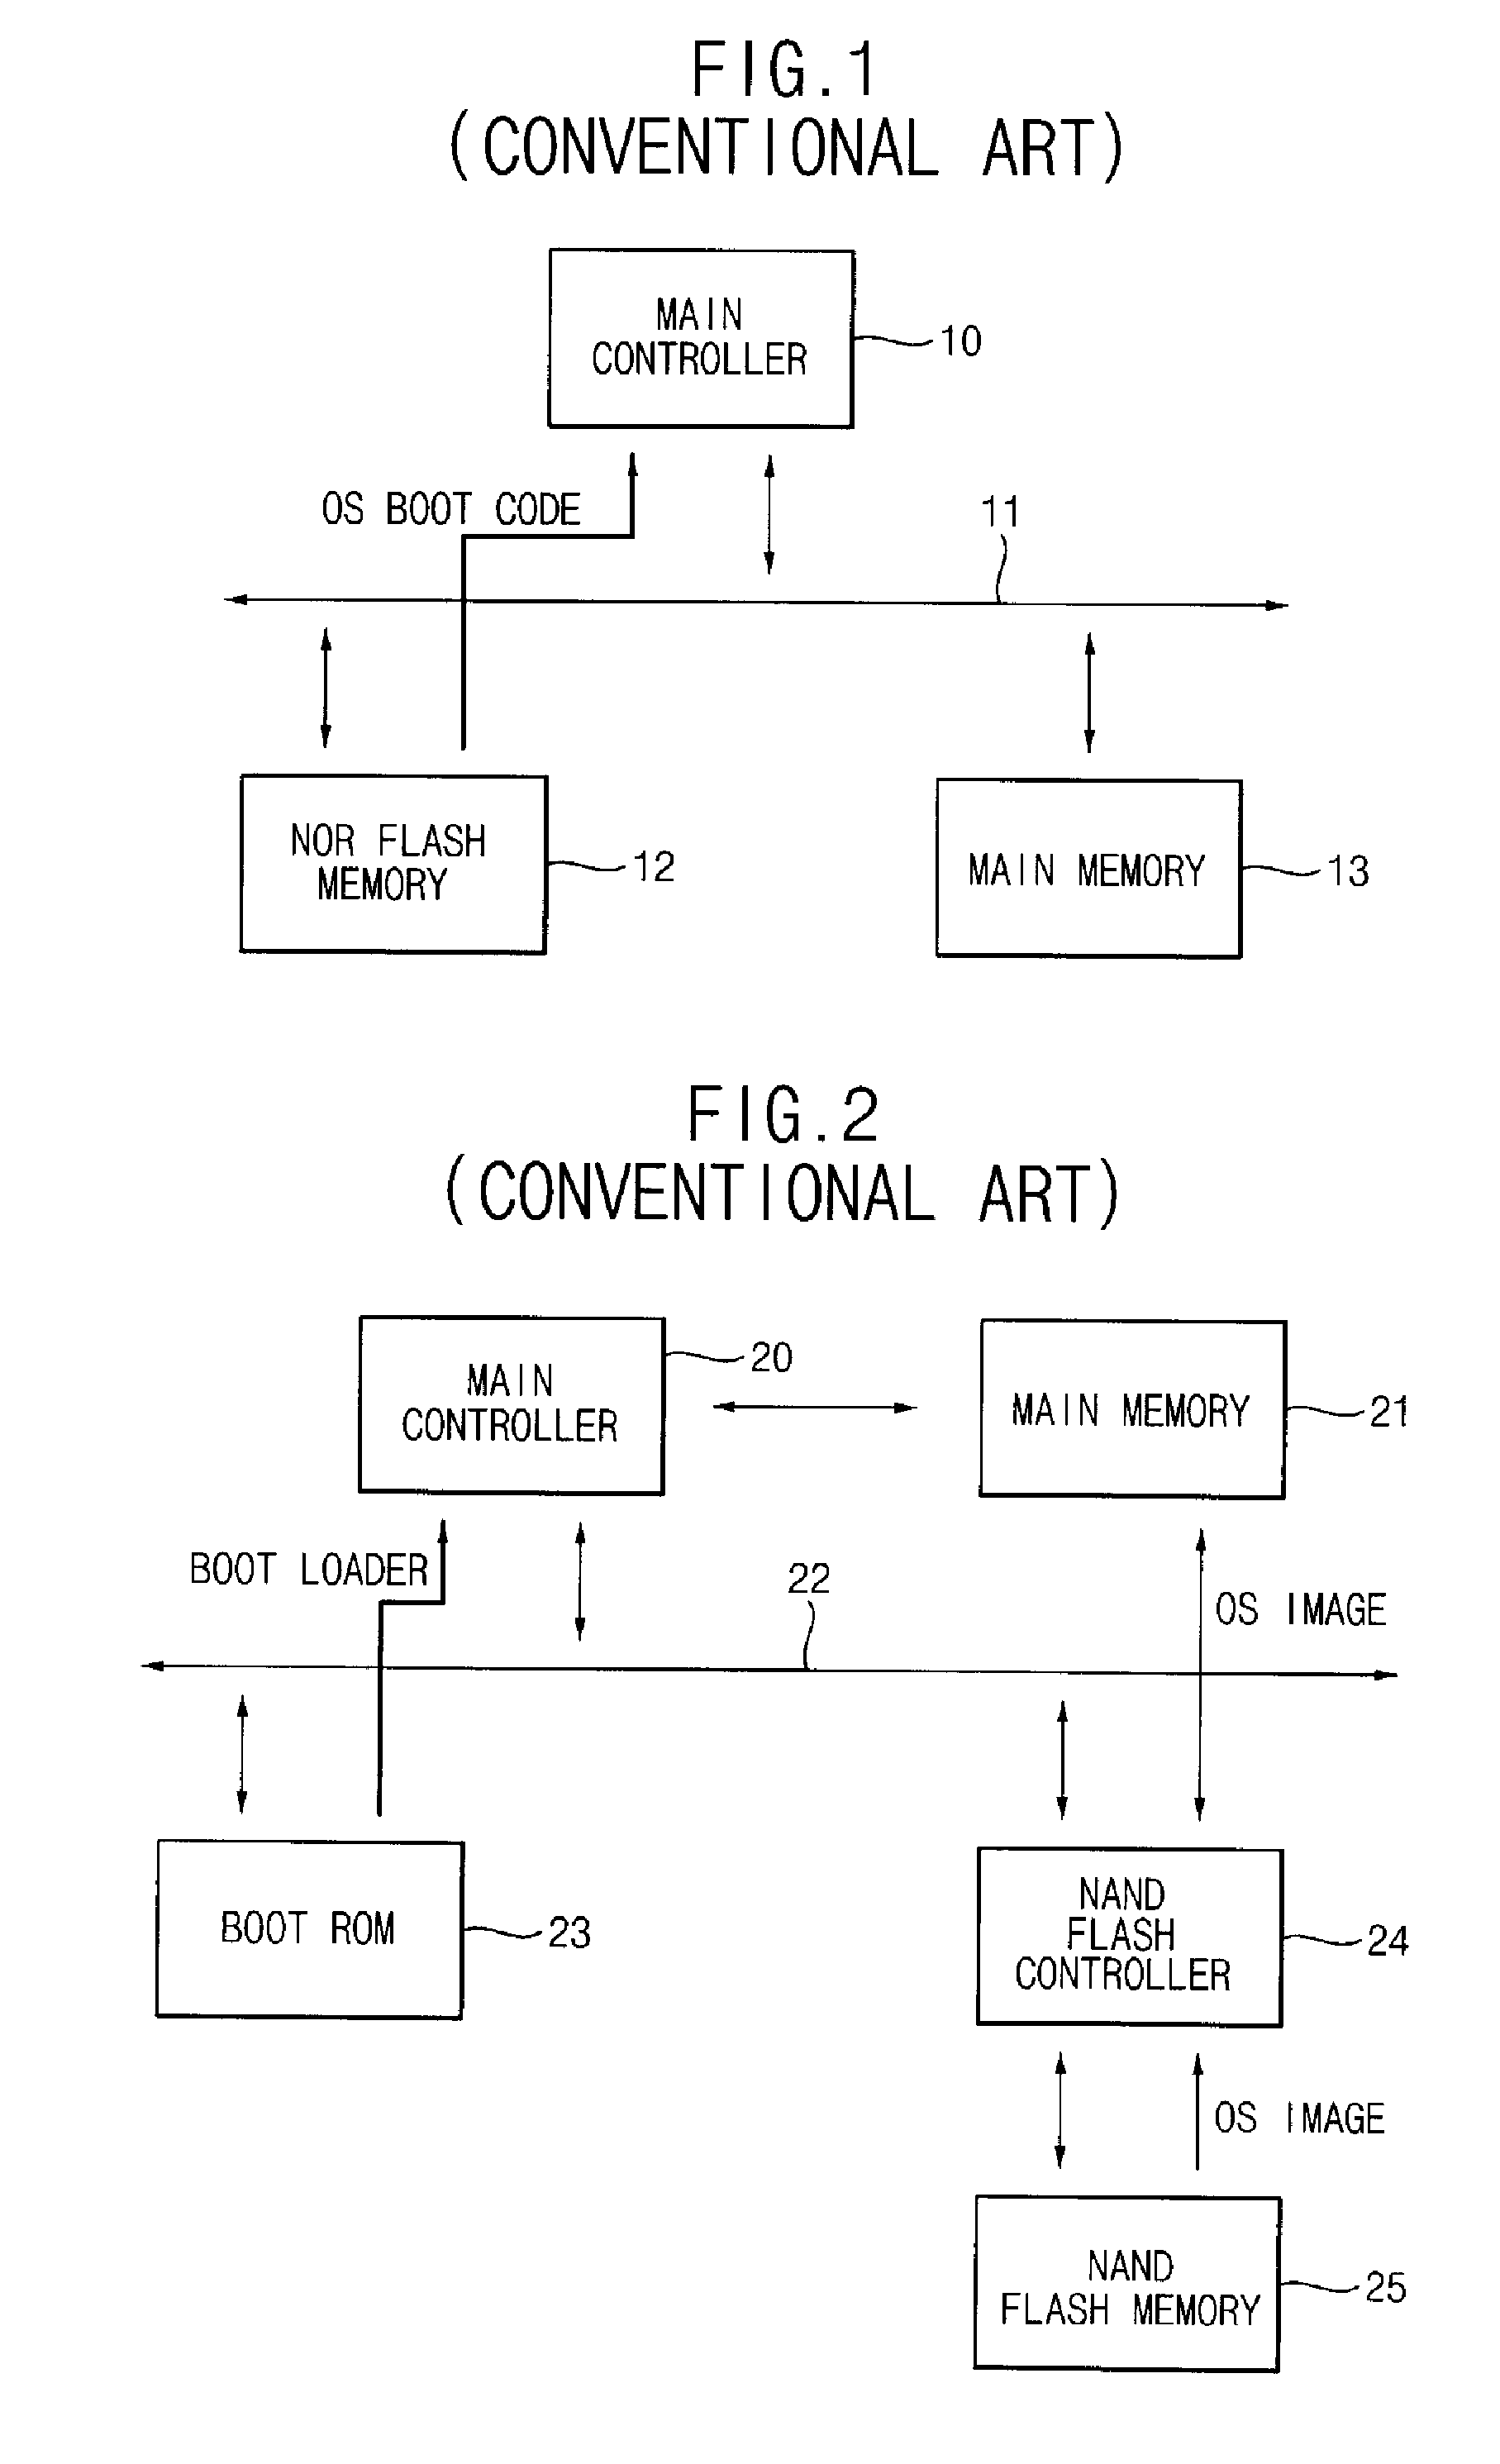 Method and apparatus for booting a microprocessor system using boot code stored on a serial flash memory array having a random-access interface